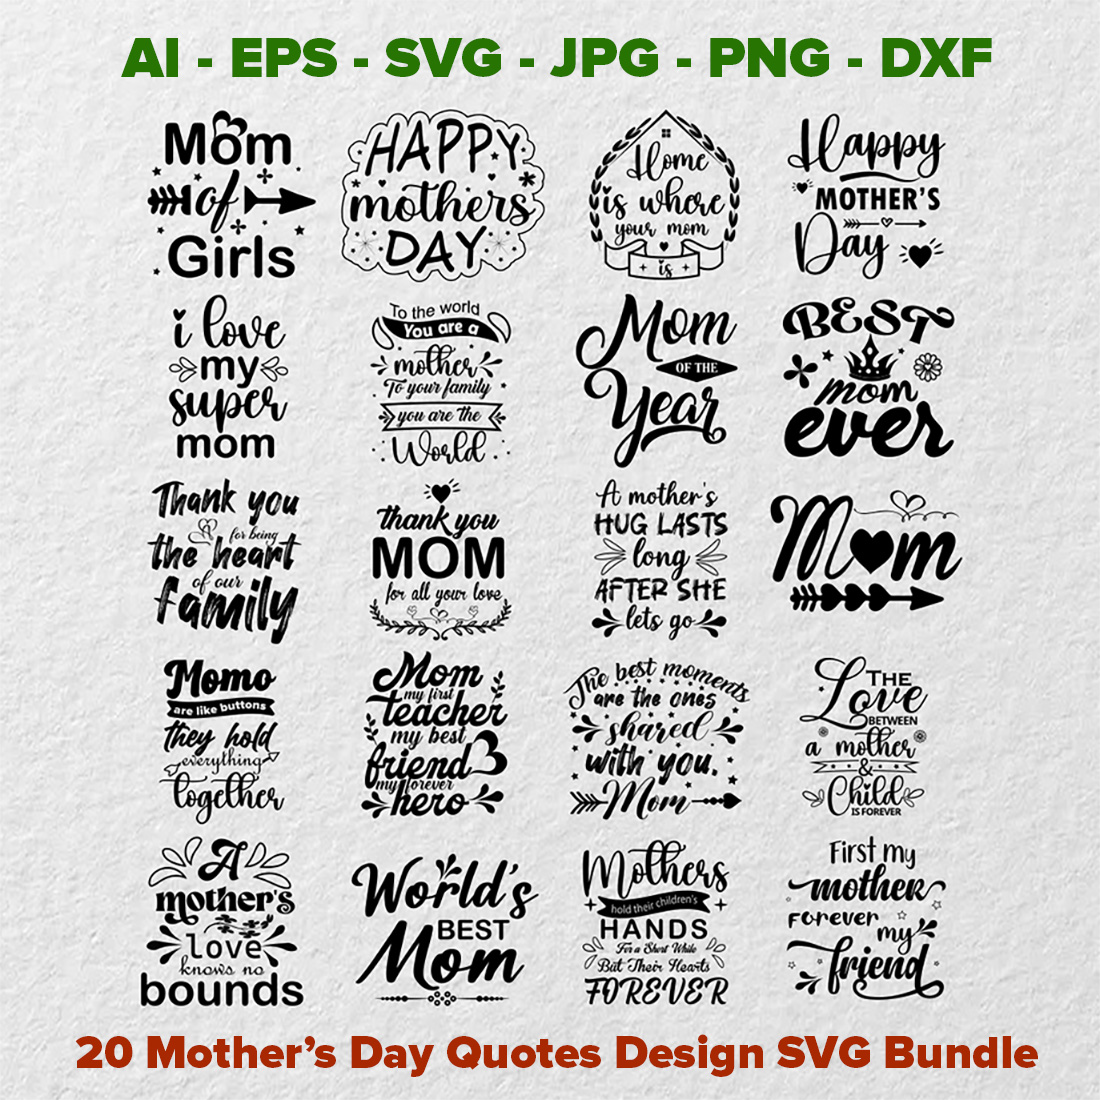 Mother’s Day Inspirational & Motivational Quotes SVG T Shirt Design Vector Bundle, Mothers Day SVG Bundle, Funny Mom Life Quotes SVG Bundle, Mothers Day Quote Vector Designs, Women’s Day cover image.